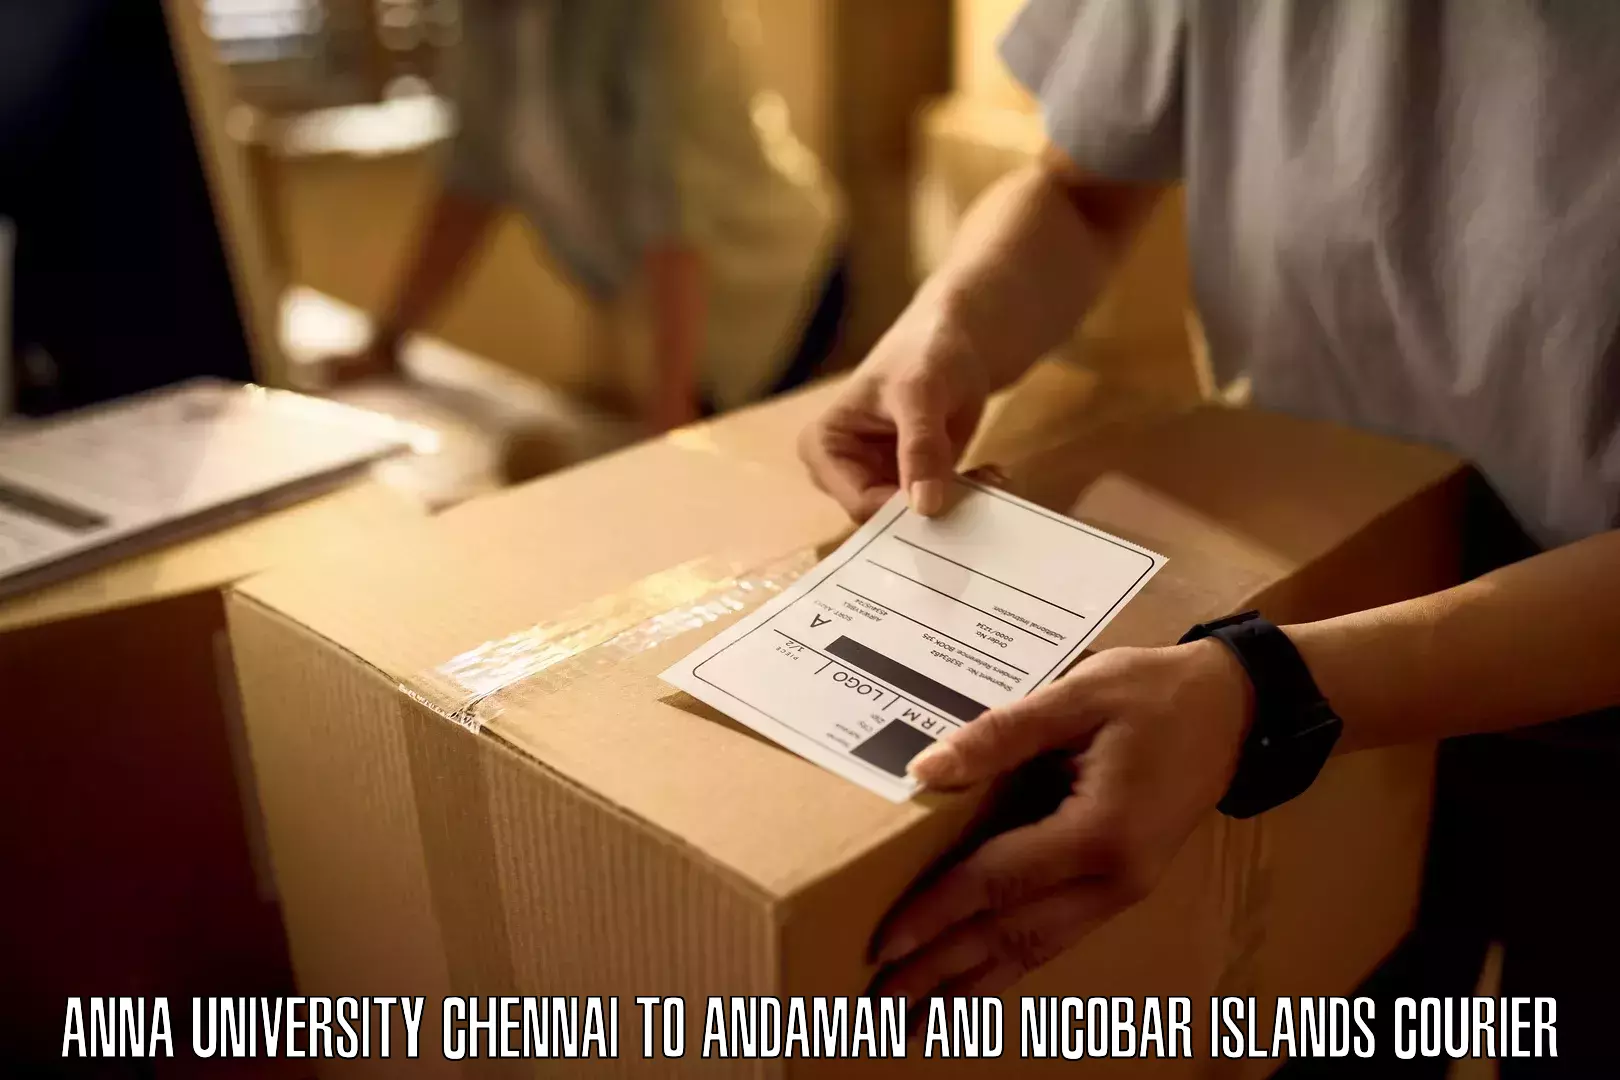 Global courier networks Anna University Chennai to South Andaman